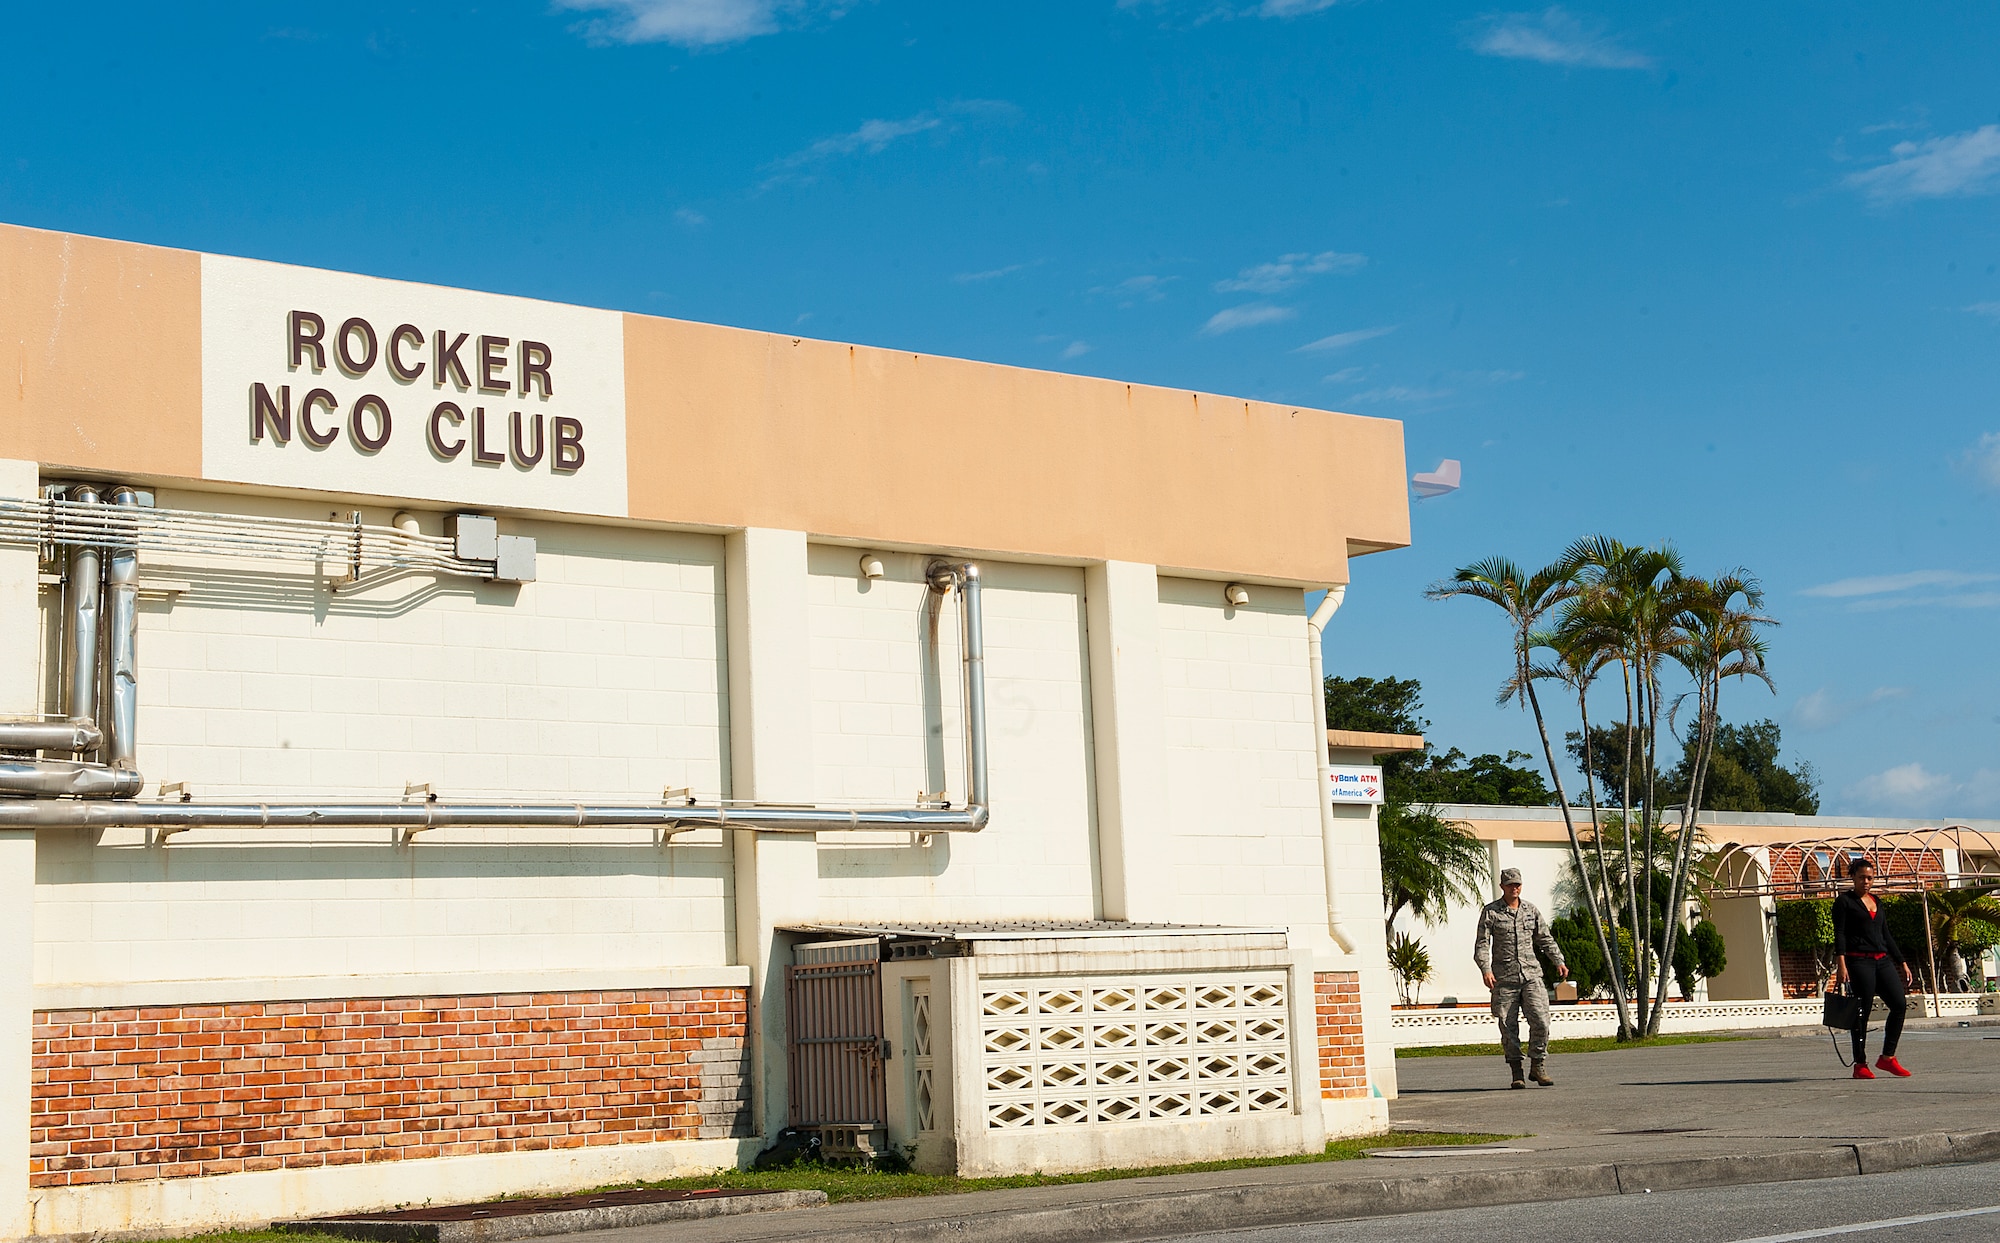 The Rocker NCO Club was originally built on Kadena Air Base, Japan, in 1958 and will now be closing its doors to make way for a brand new facility. The new $47 million facility will take approximatly 18 to 24 months to complete. (U.S. Air Force photo by Airman 1st Class Corey M. Pettis)